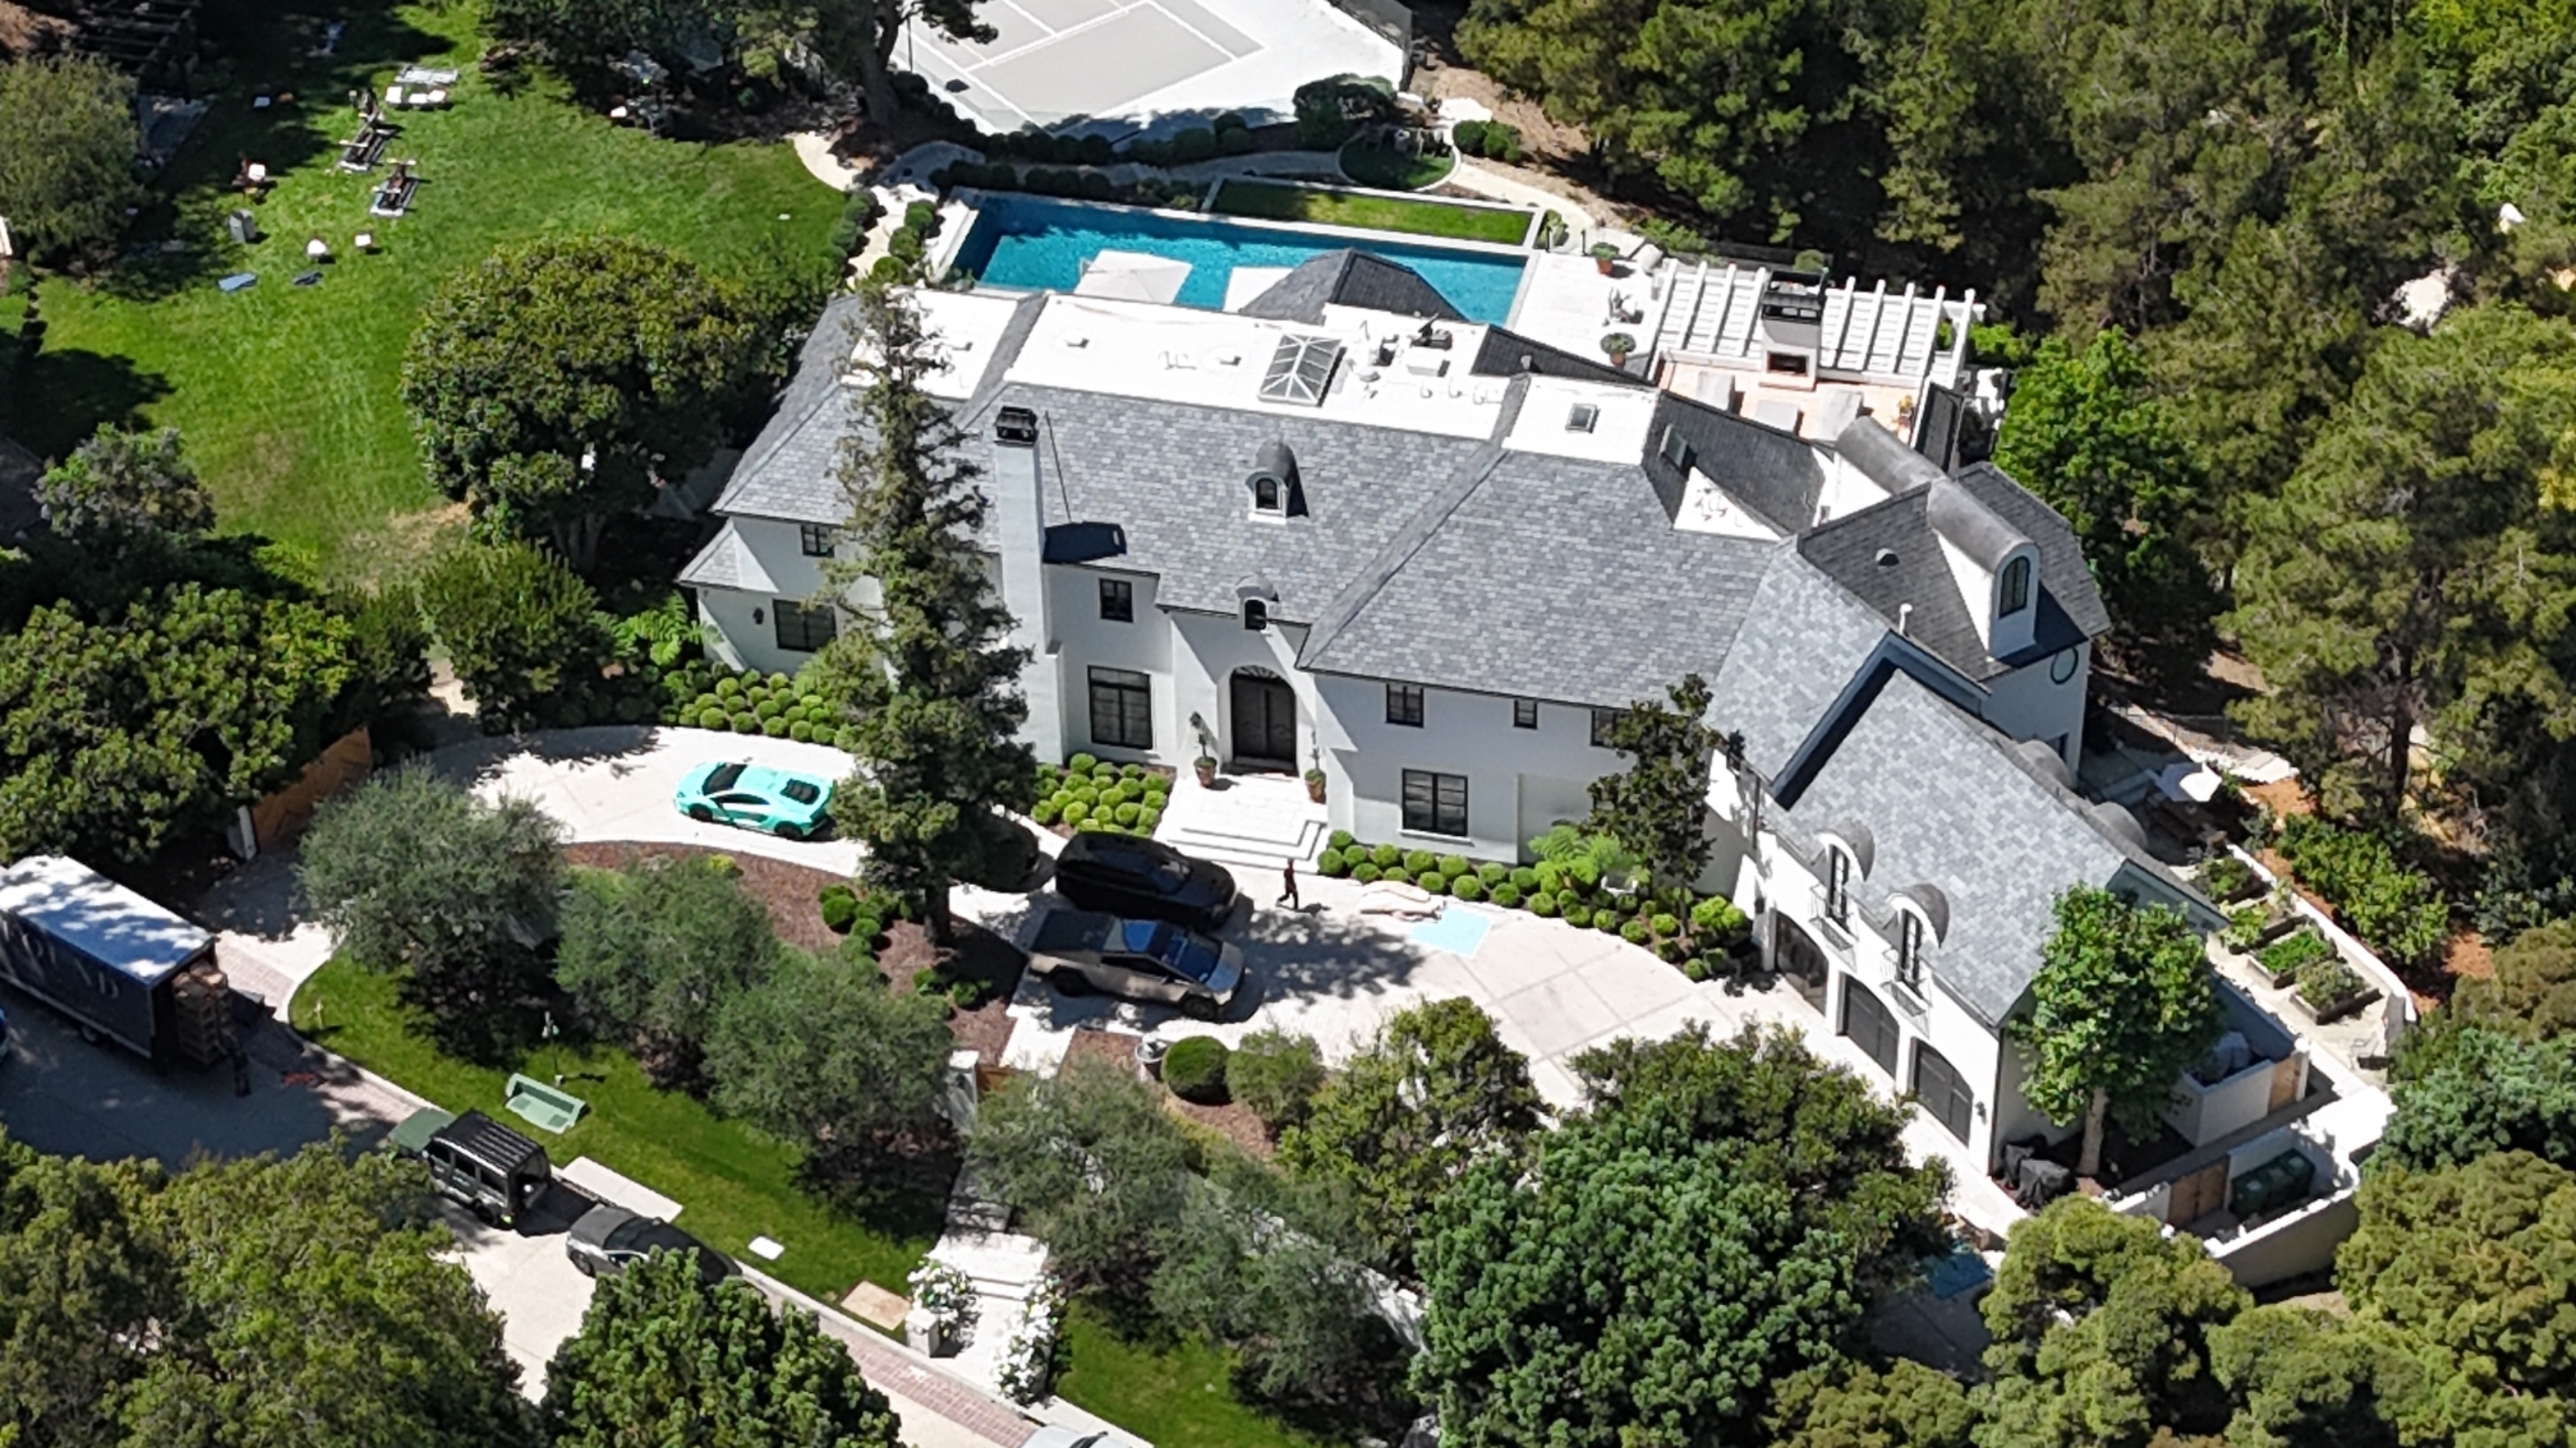 The couple's home is located in a gated community in the prestigious Beverly Park neighborhood of Los Angeles